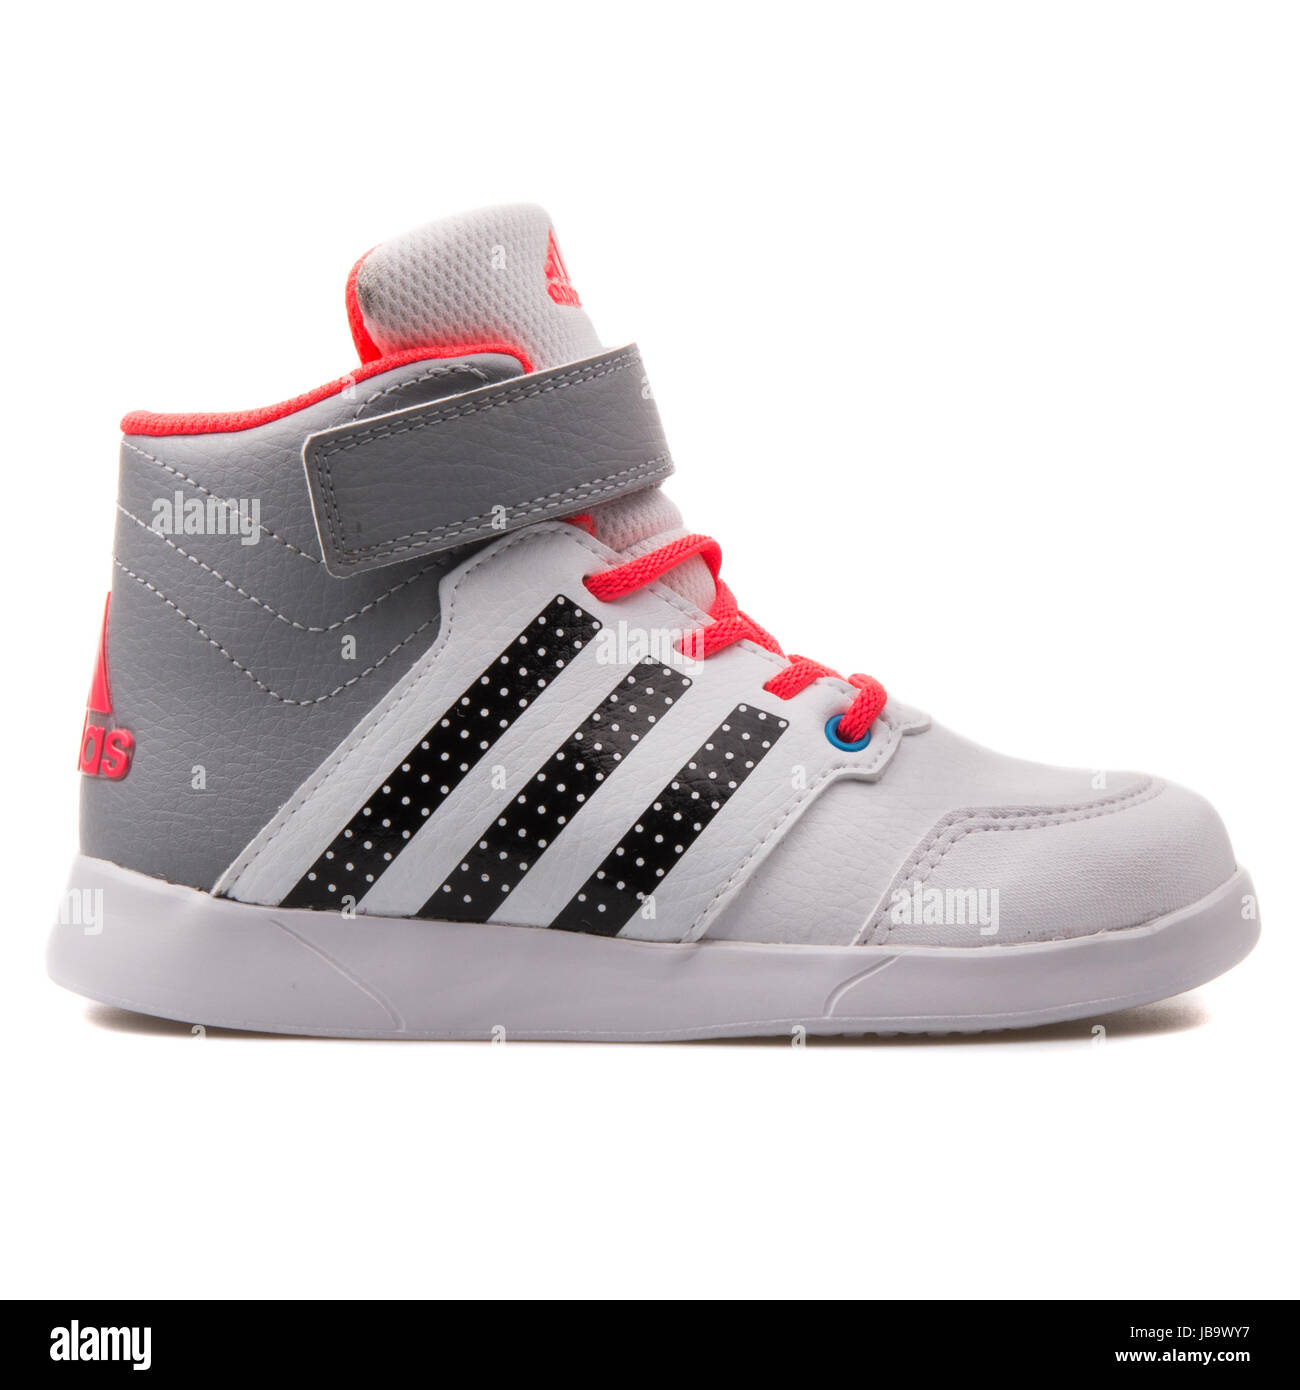 Adidas Jan BS 2 Mid 1 White and Grey Children's Shoes - B23910 Stock Photo  - Alamy